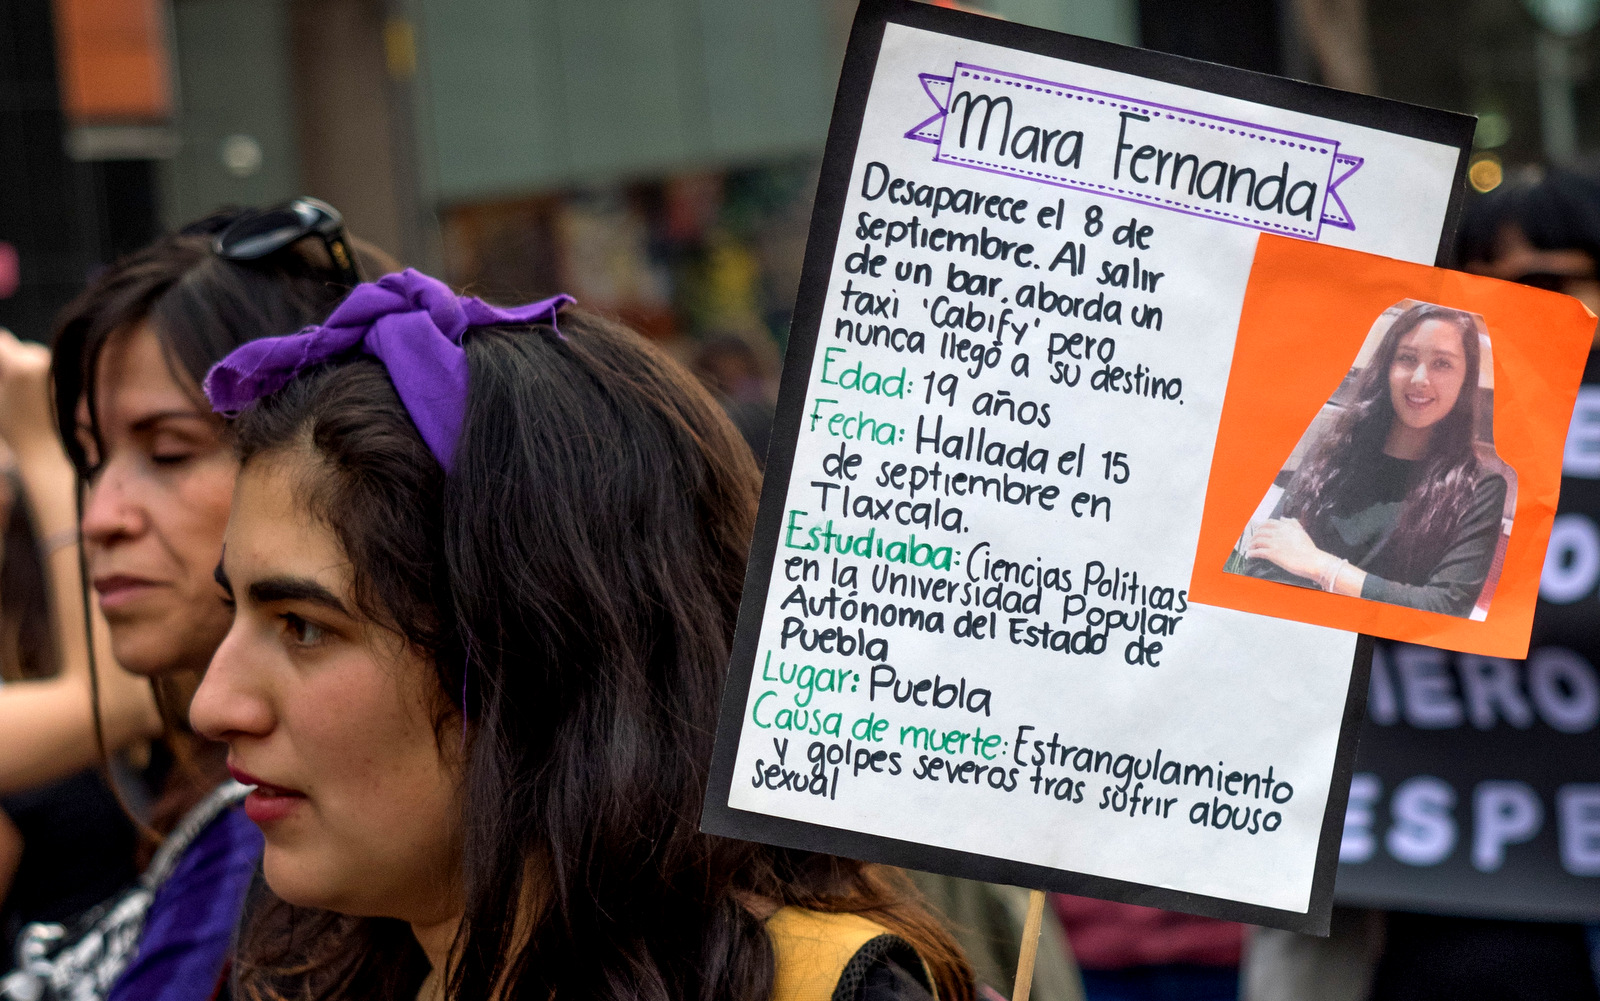 A young woman attending the International Women's Day in Mexico City holds a sign with the name and story of Mara Fernanda, a women allegedly killed by her cab driver in a case that caused reverberations throughout Mexico, March 8, 2018. (Photo: José Luis Granados Ceja/MintPress News)